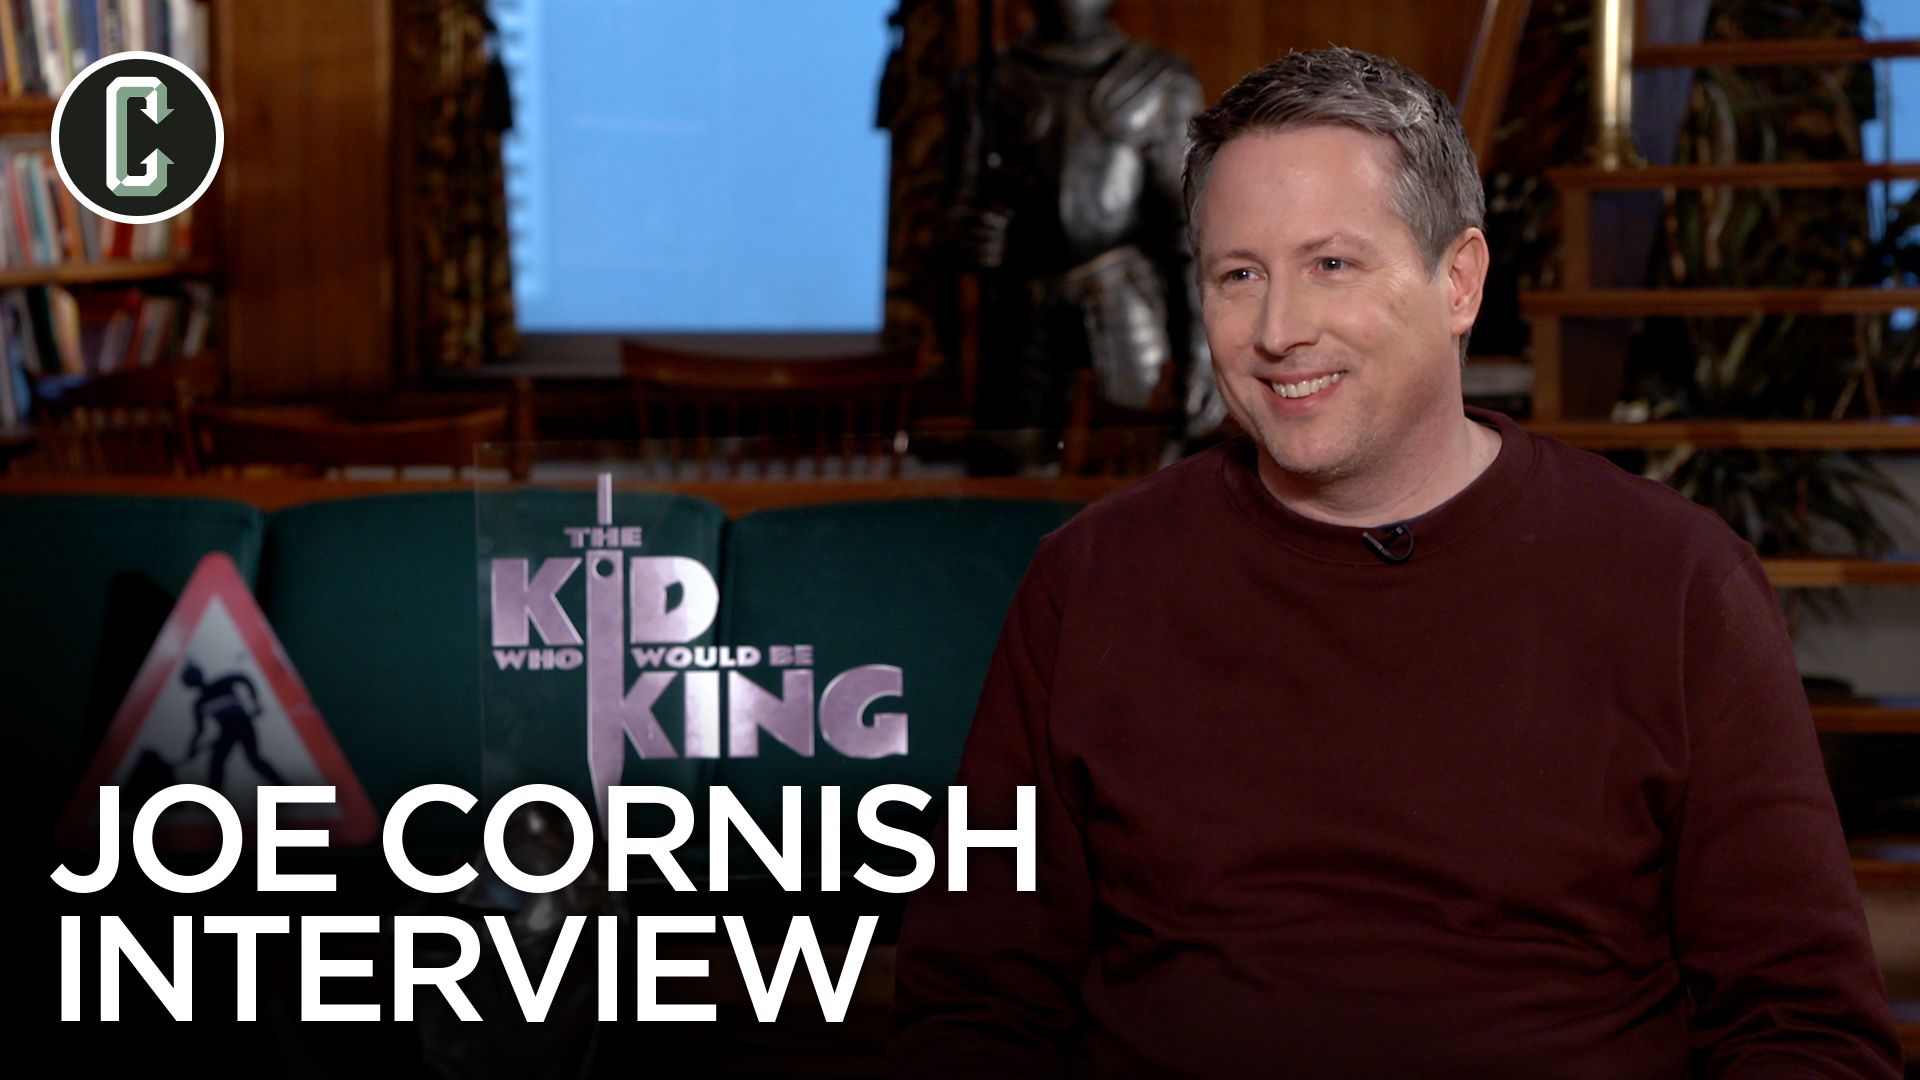 Joe Cornish on the Timing of The Kid Who Would Be King | Collider1920 x 1080